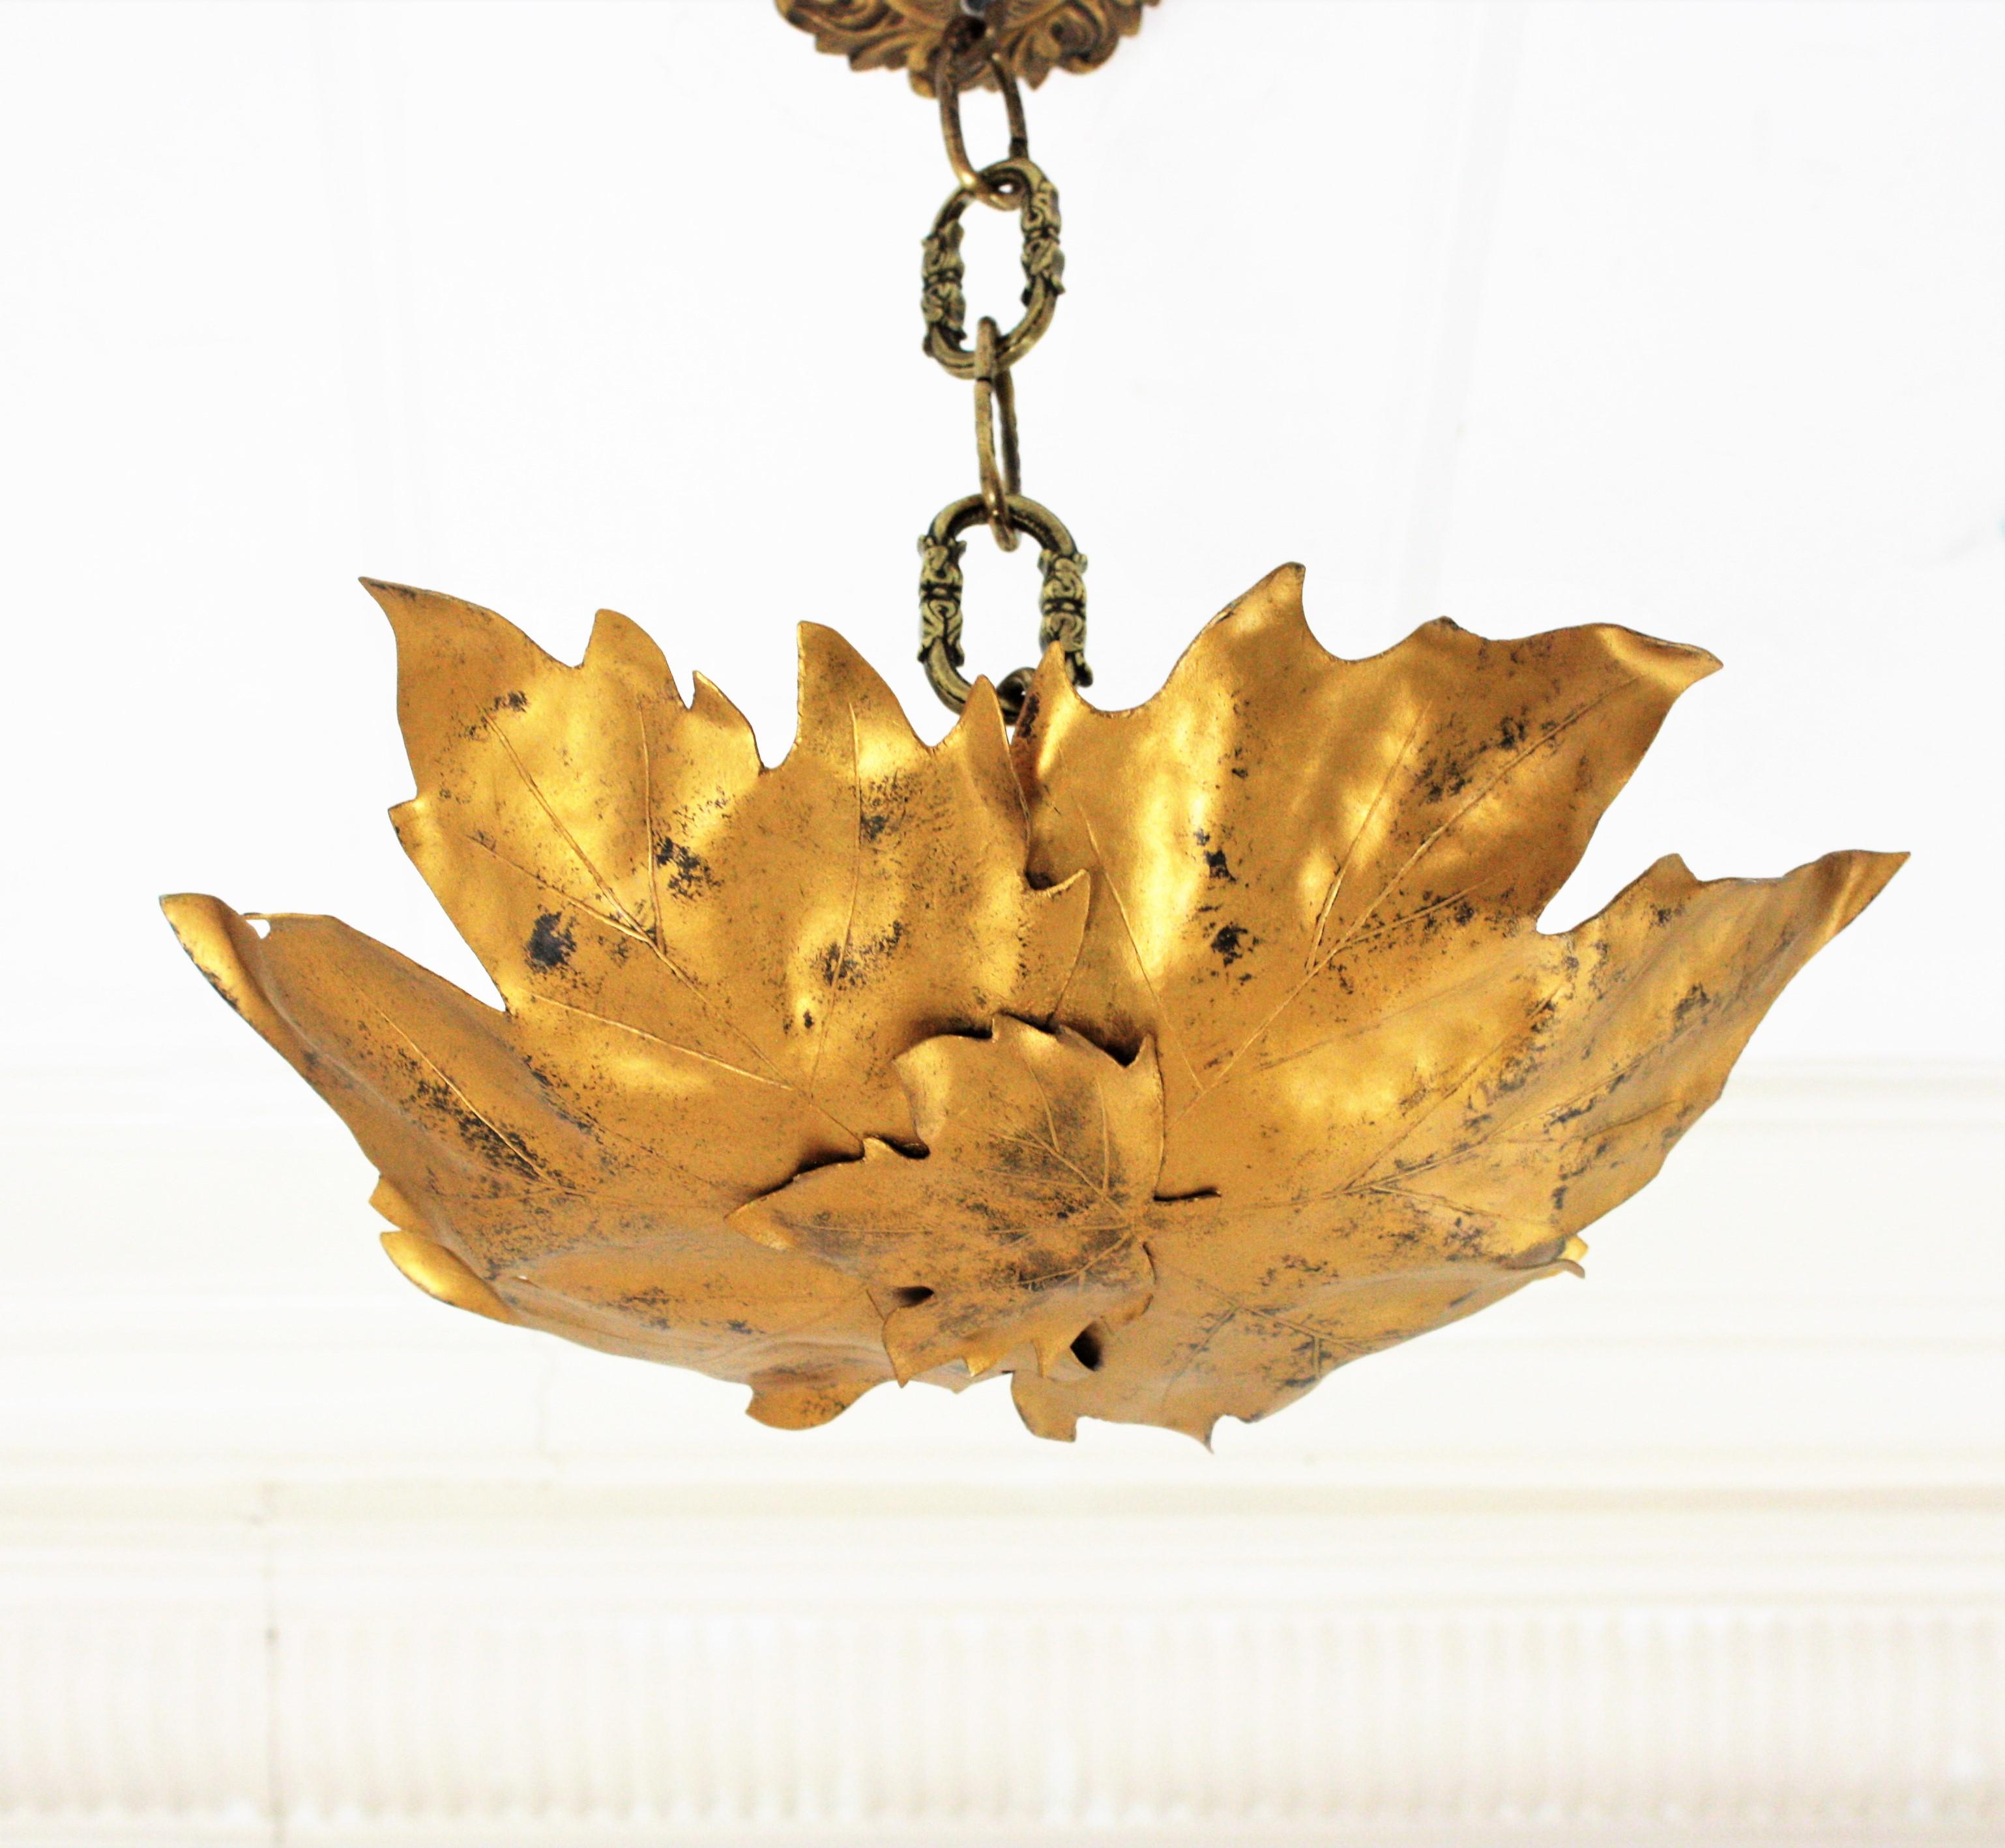 Leaves Shaped Flush Mount, Gilt Iron, Spain, 1960s.
Eyecatching handcrafted light fixture with leaf design and gilt finish. It features two intertwined large leaves adorned by an smaller leaf at the central part.
Finely executed in gilt iron it